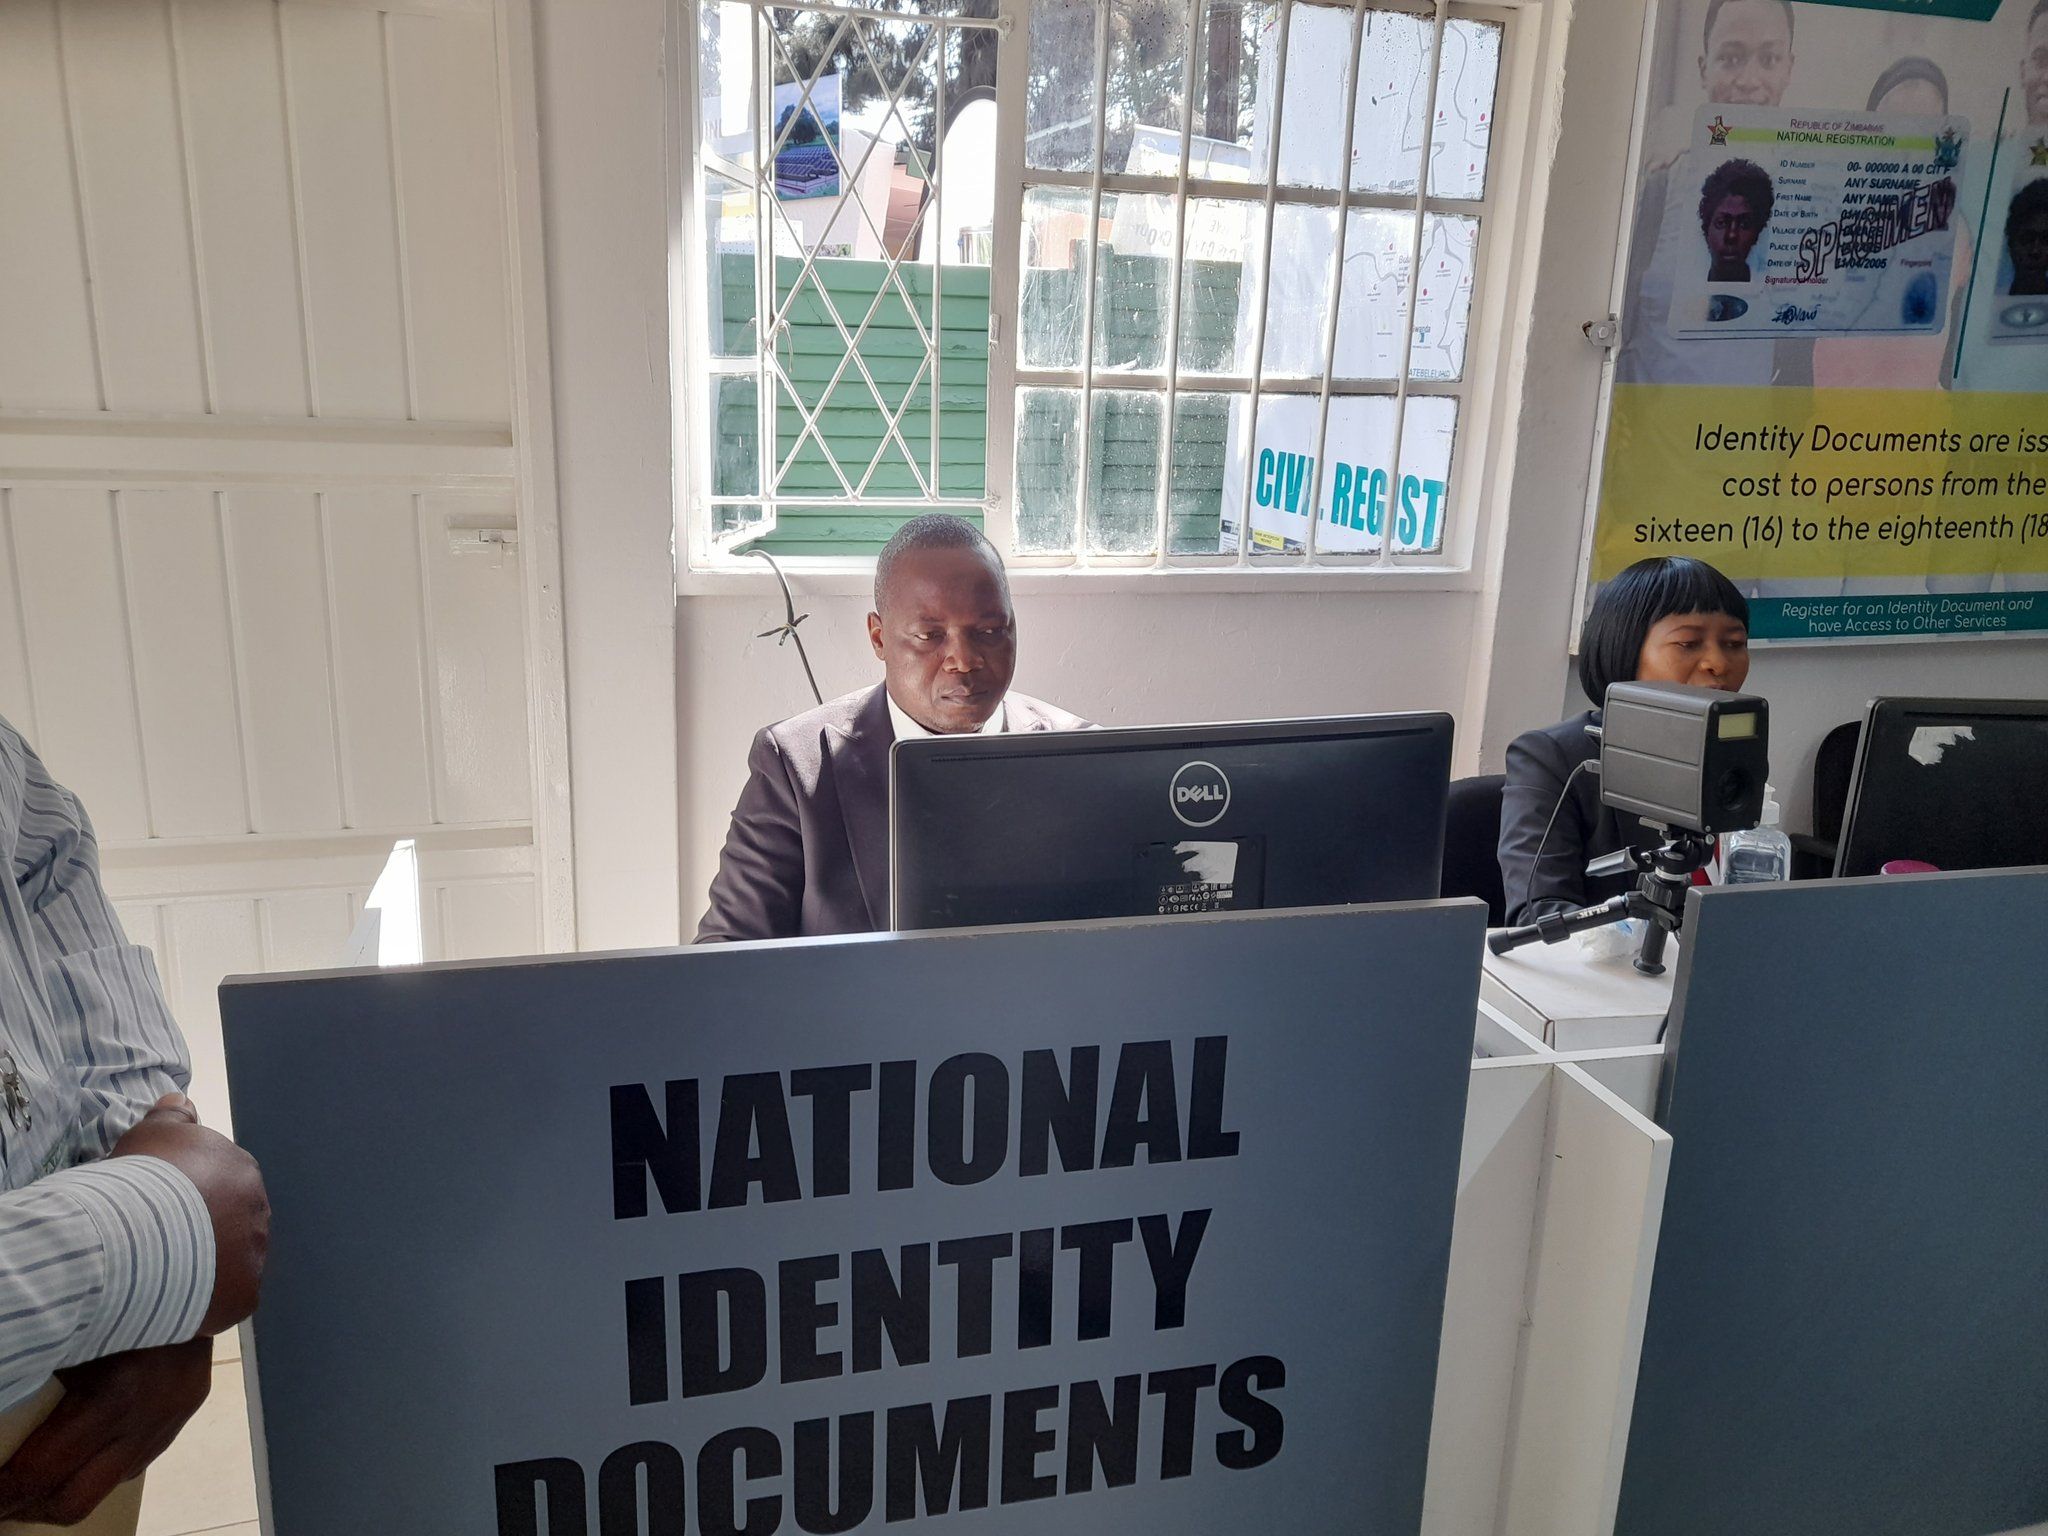 Civil registry deploys mobile teams for issuance of national identity documents